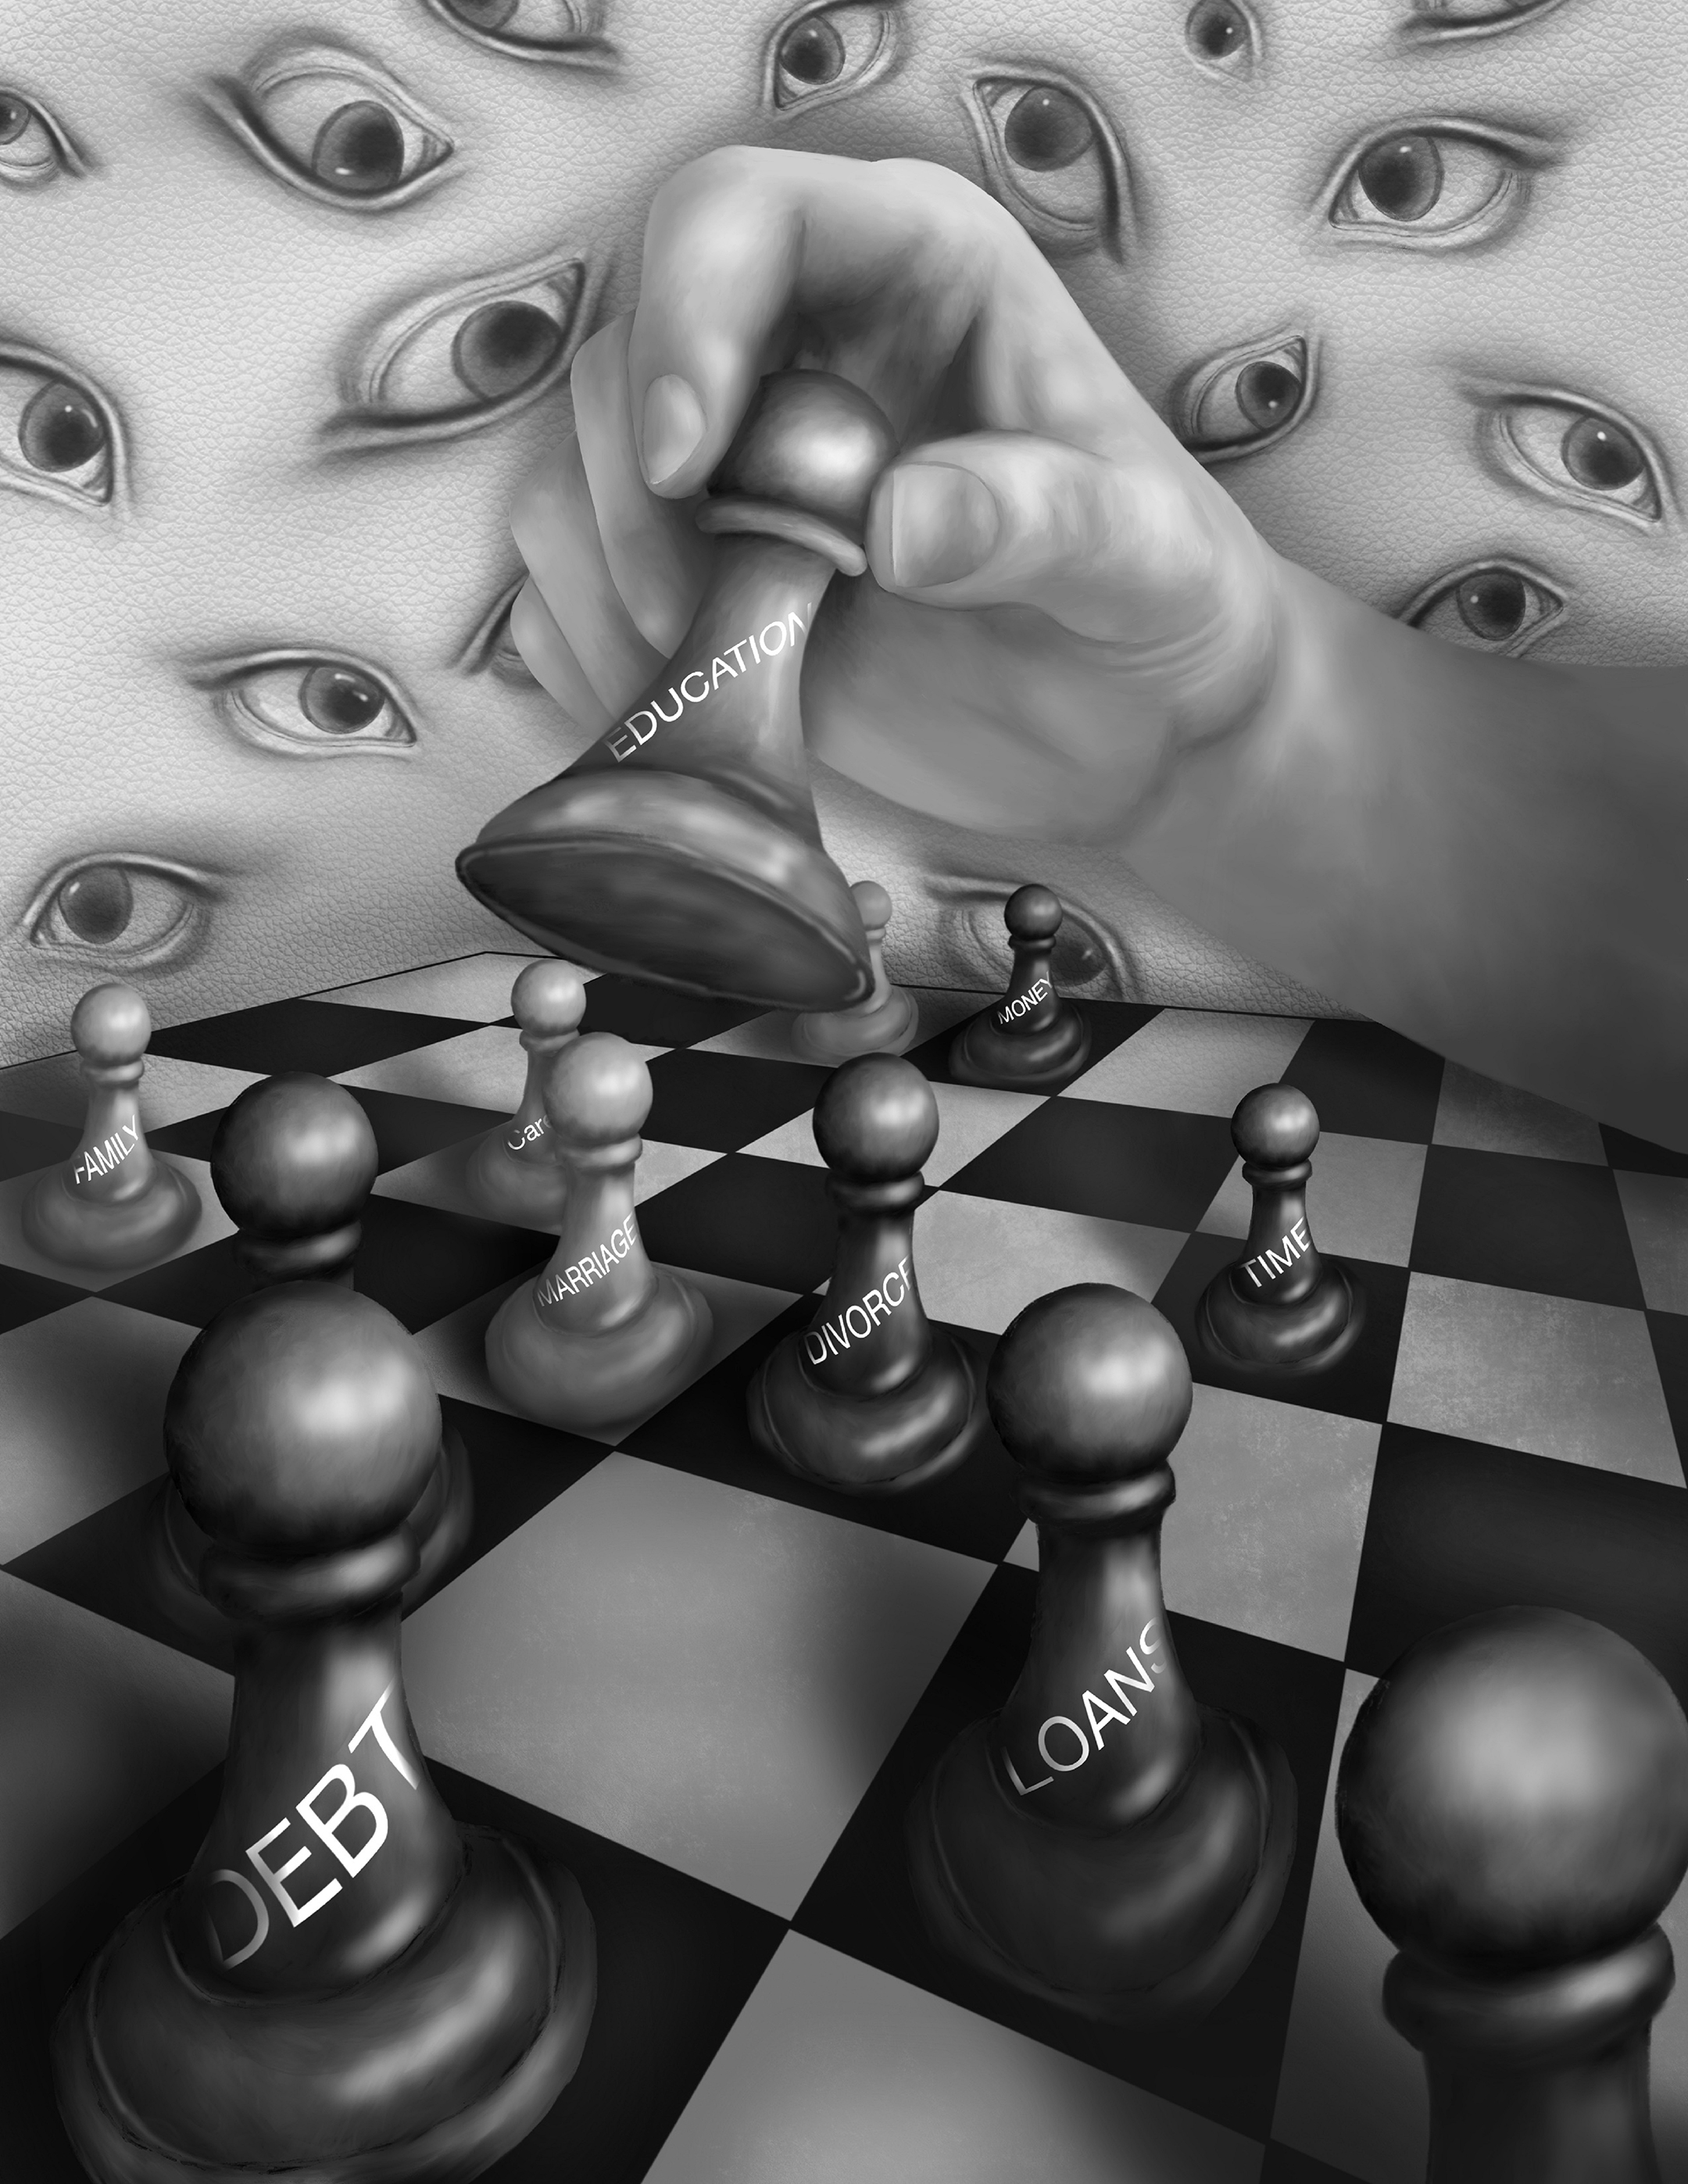 black and white illustration of a hand moving a pawn on a chess board with the word education written on the pawn, against a background of eyes